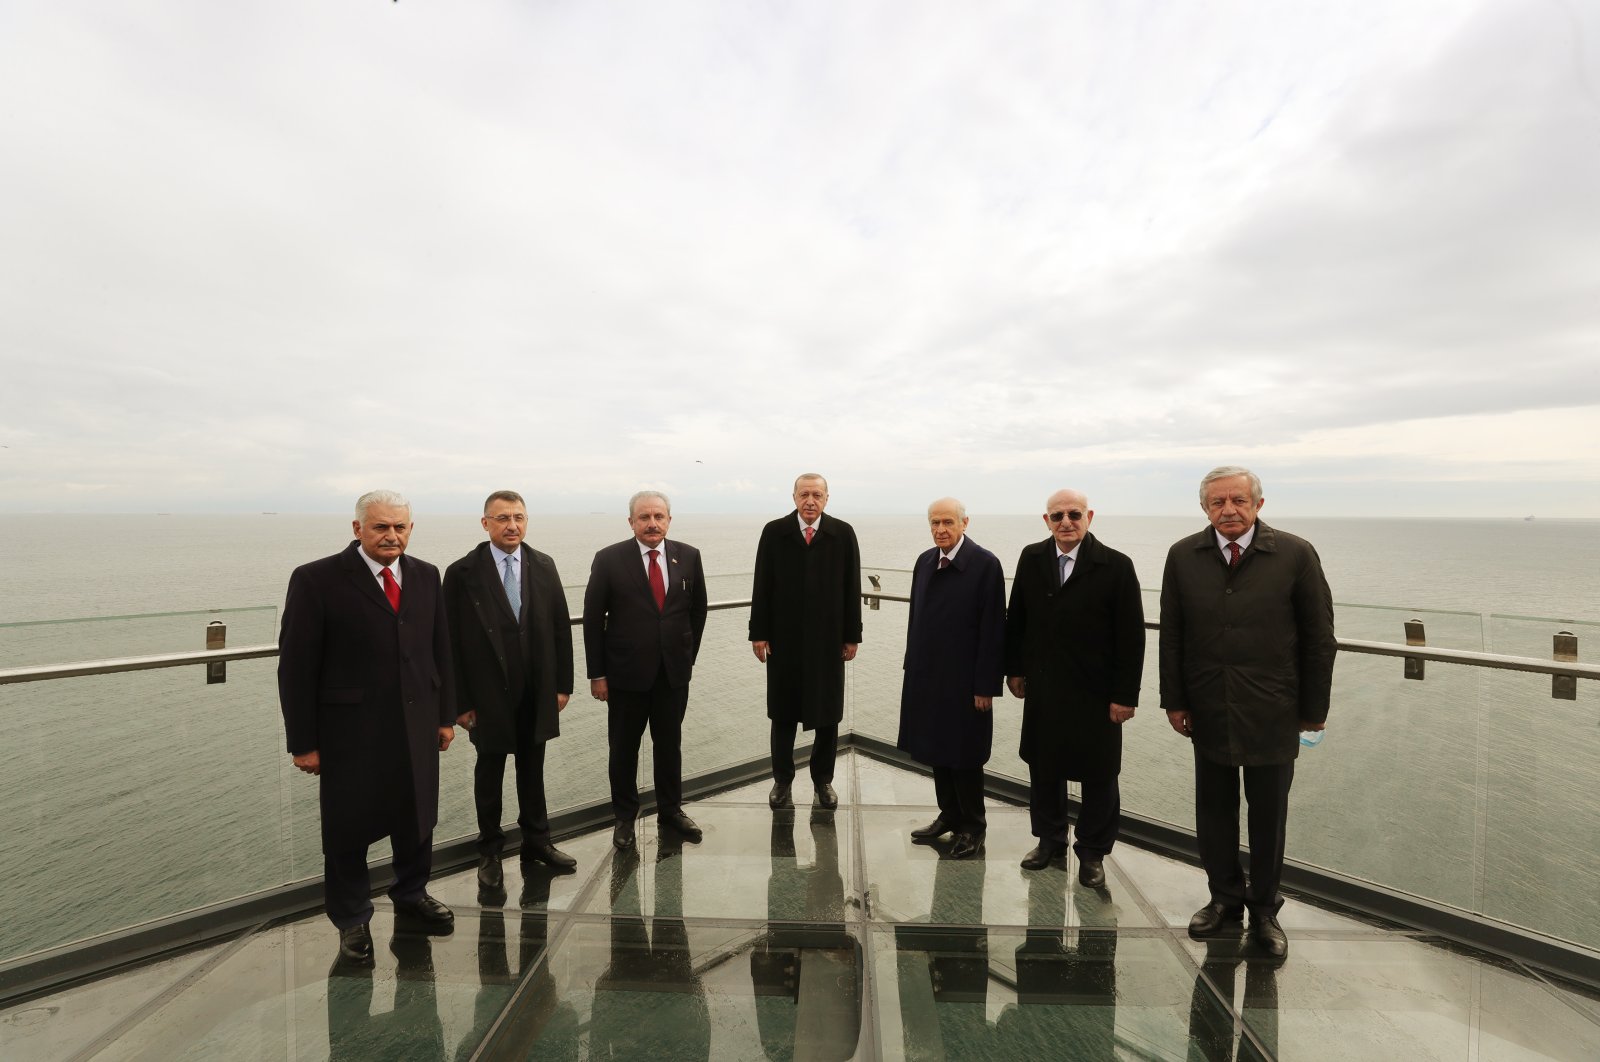 President Recep Tayyip Erdoğan (c), alongside Parliamentary Speaker Mustafa Şentop (first on the left), Vice President Fuat Oktay (second on the left), Izmir Deputy of AK Party Binali Yıldırım, MHP leader Devlet Bahçeli (first on the right), former Parliamentary Speaker Ismail Kara (second on the right) and Parliament’s Deputy Chairman Celal Adan (third on the right), pose just before the inauguration ceremony of Democracy and Freedom Island, May 27, 2020. (DHA)